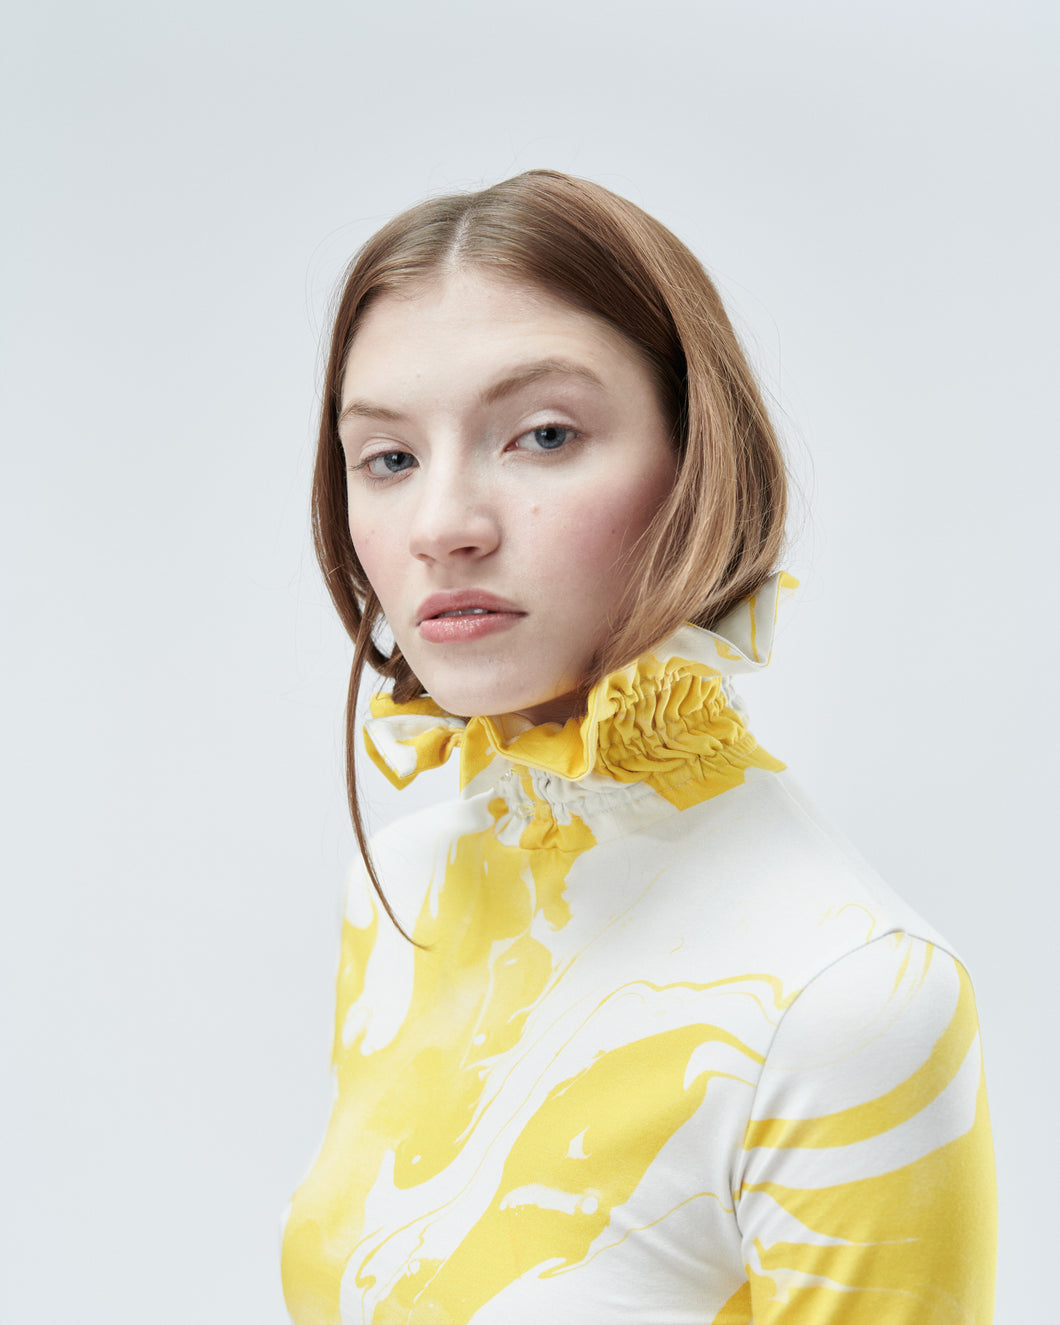 NARCISSUS HIGH-NECK TOP, yellow marble